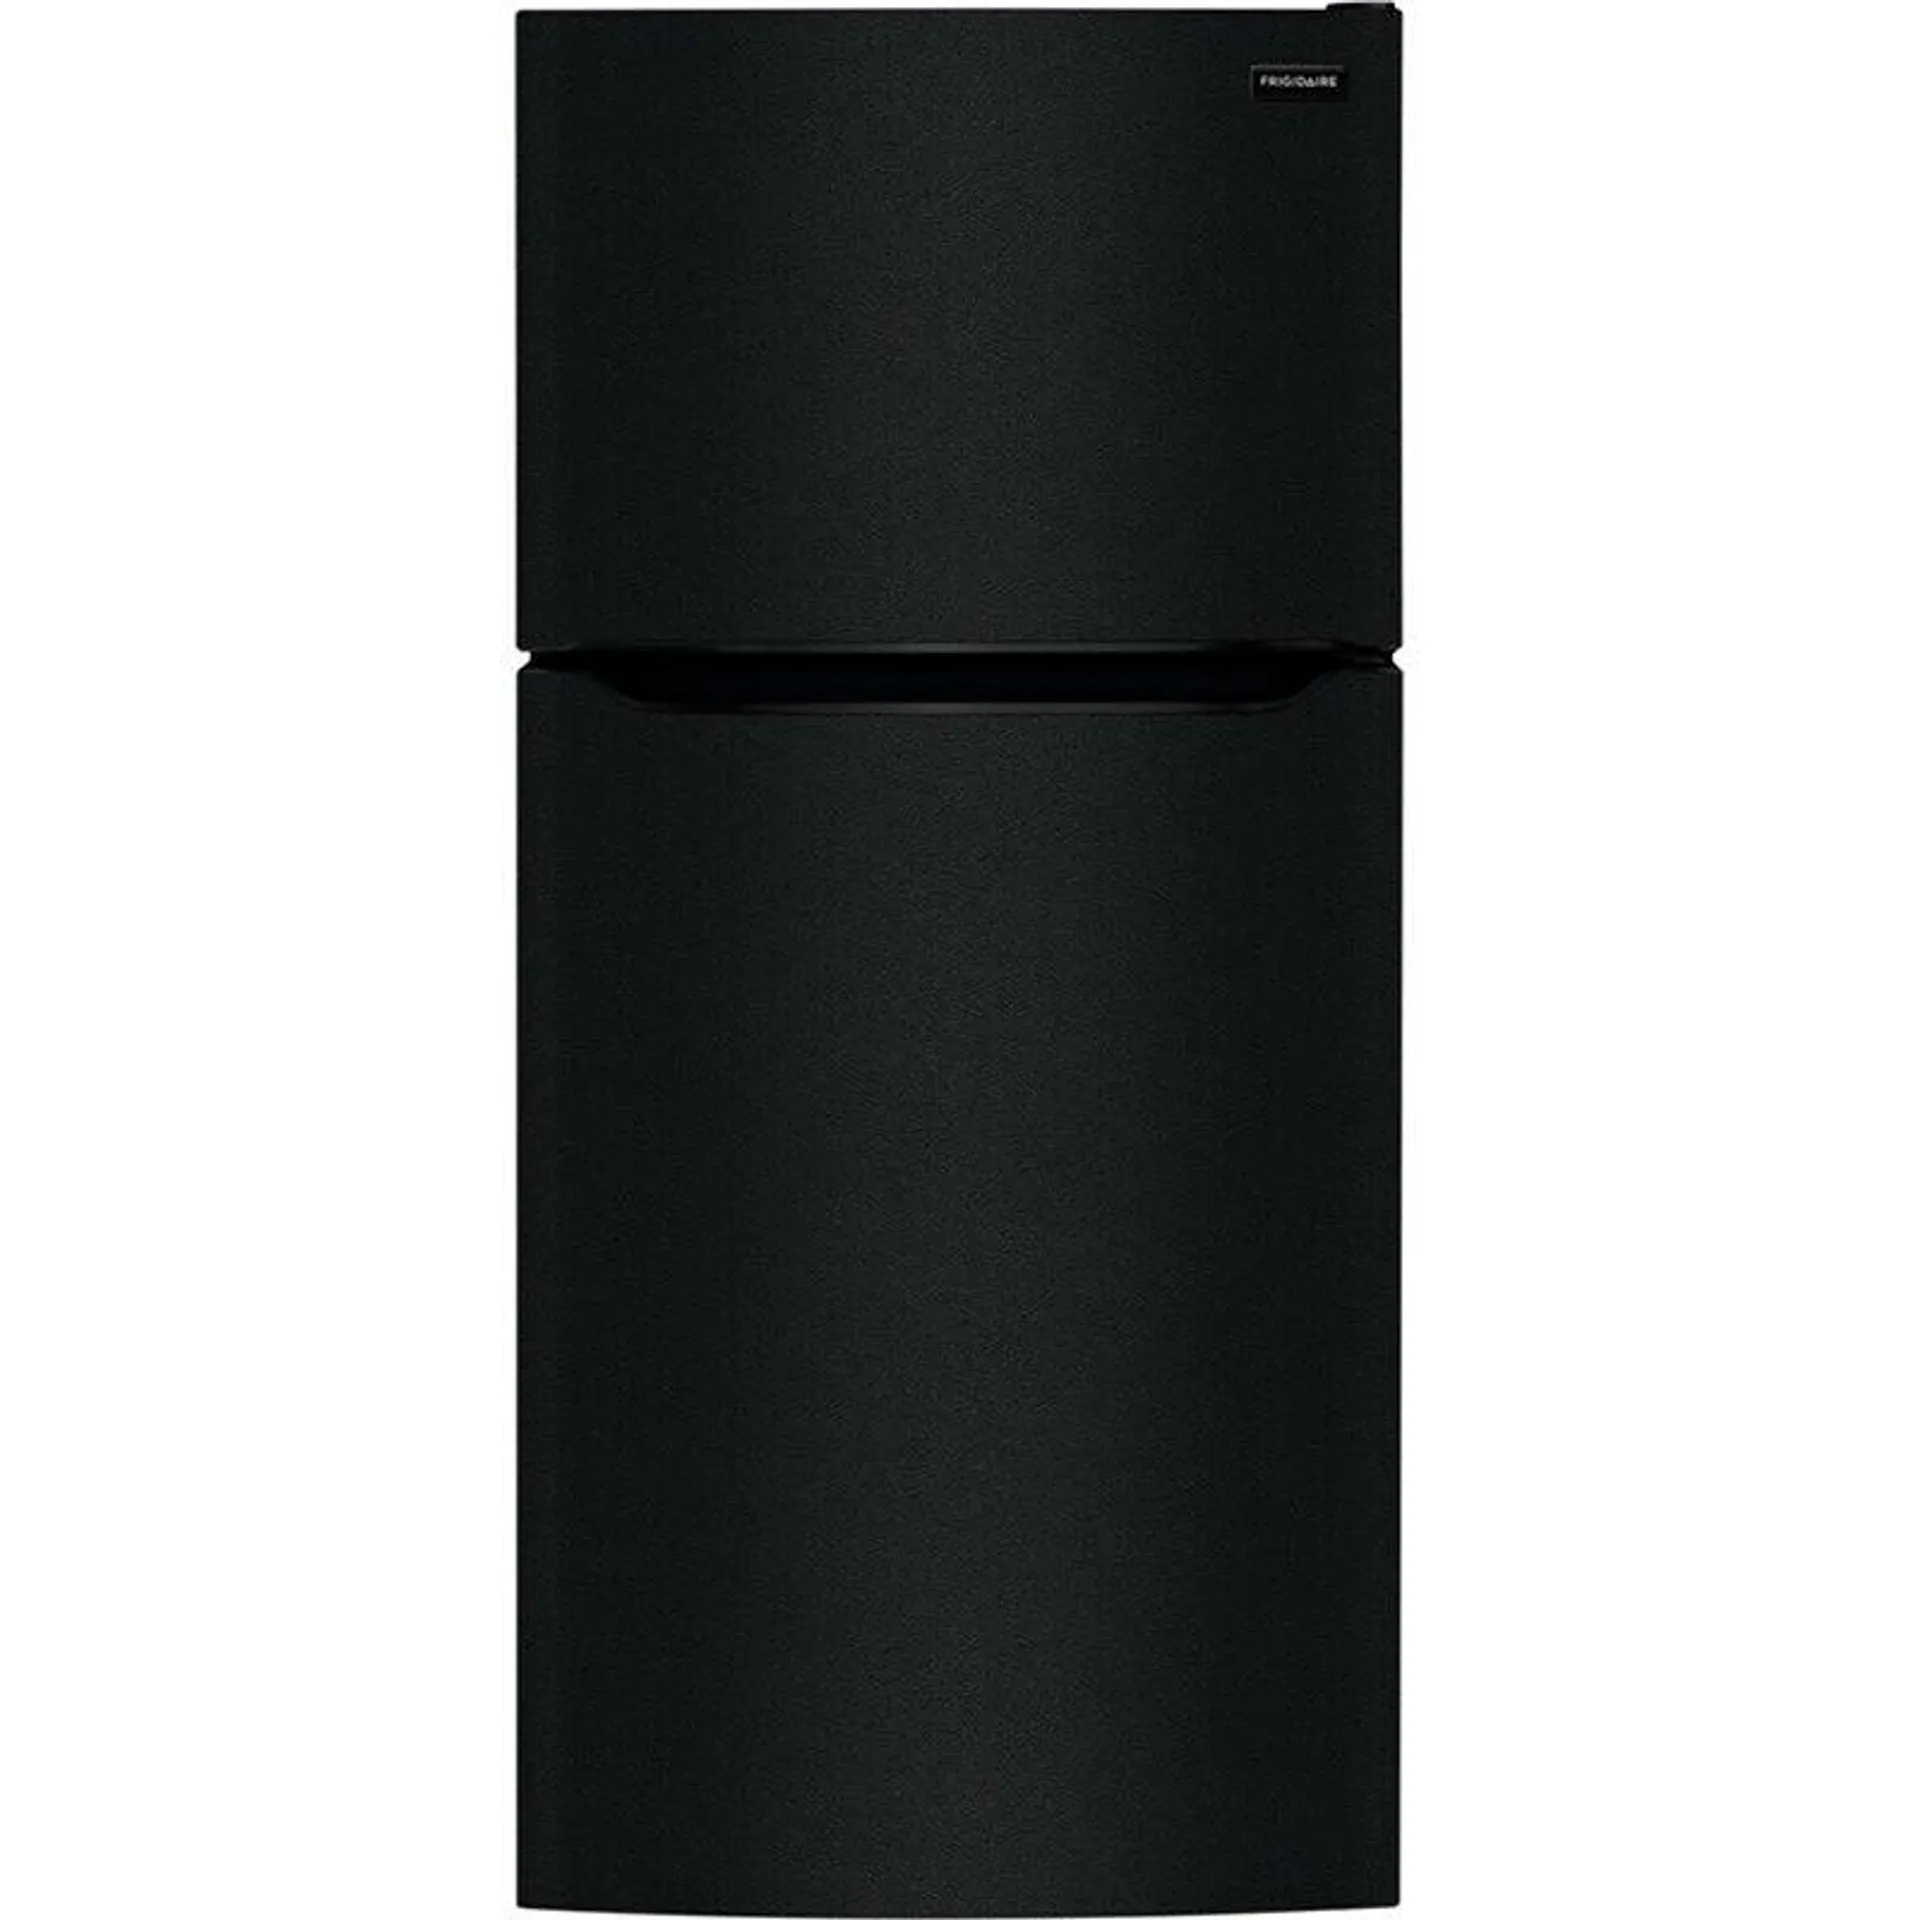 Frigidaire 30 in. 18.3 cu. ft. Top Freezer Refrigerator with Wire Shelves - Black